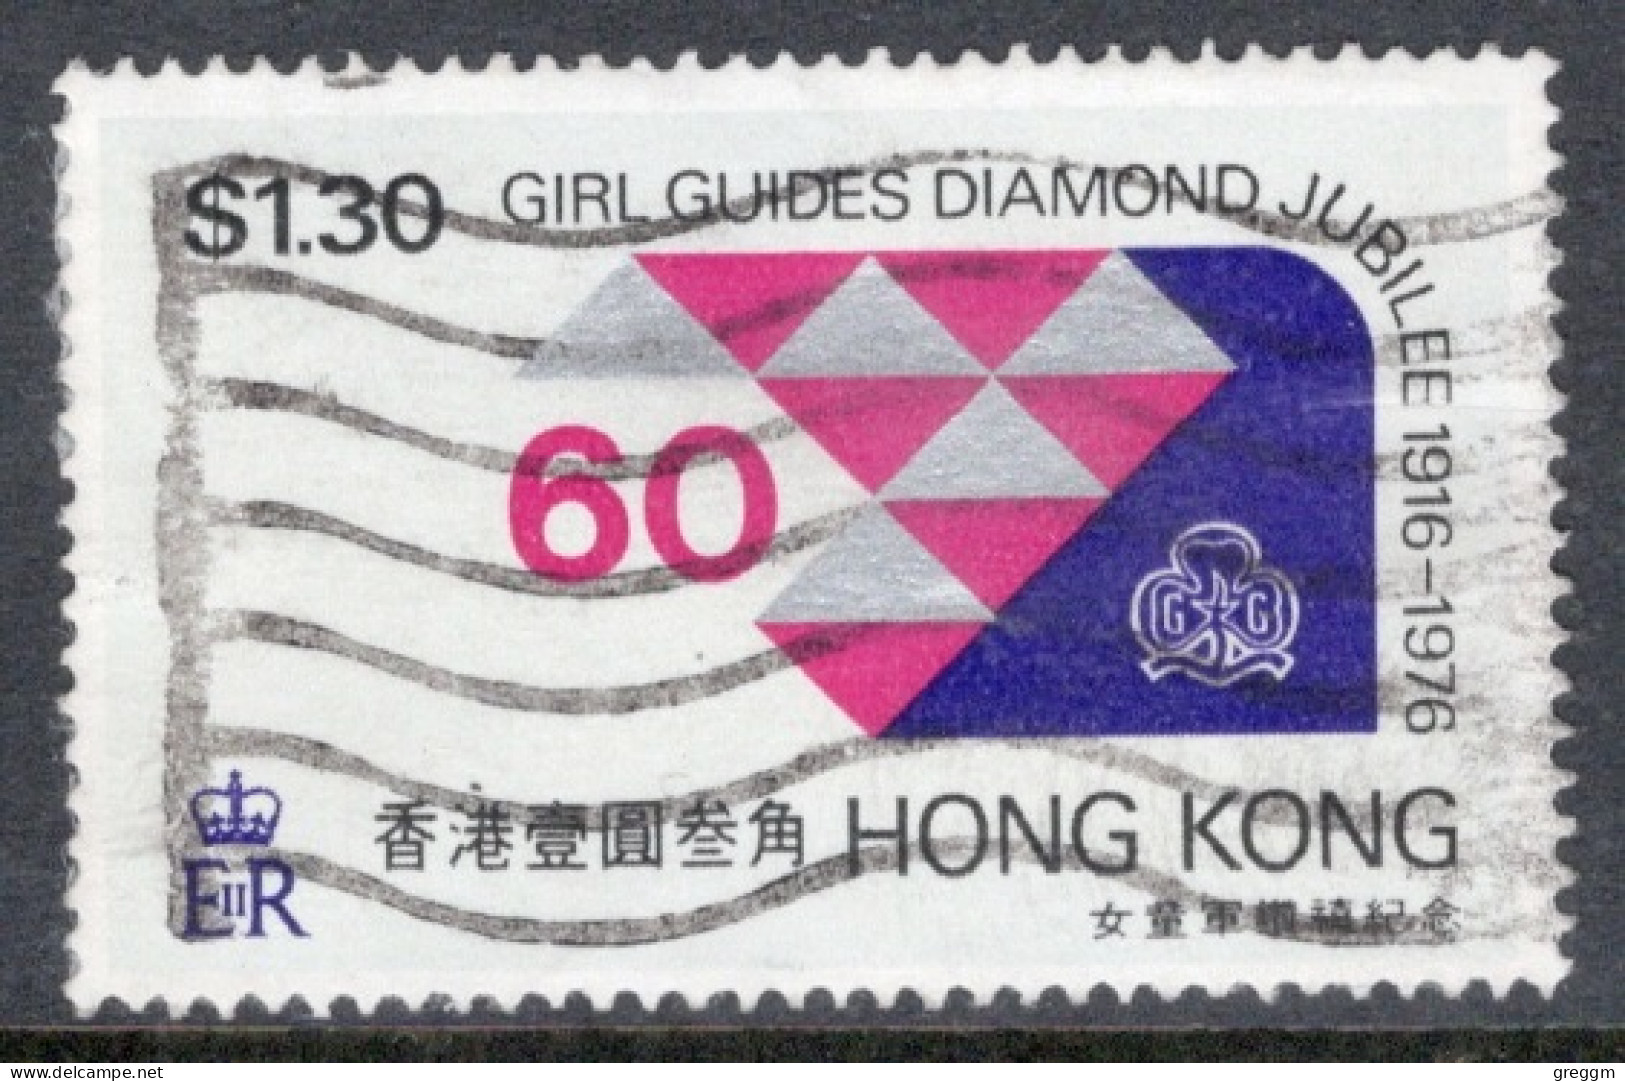 Hong Kong 1976 A Single Stamp To Celebrate The 60th Anniversary Of Girl Guides In Fine Used - Usados